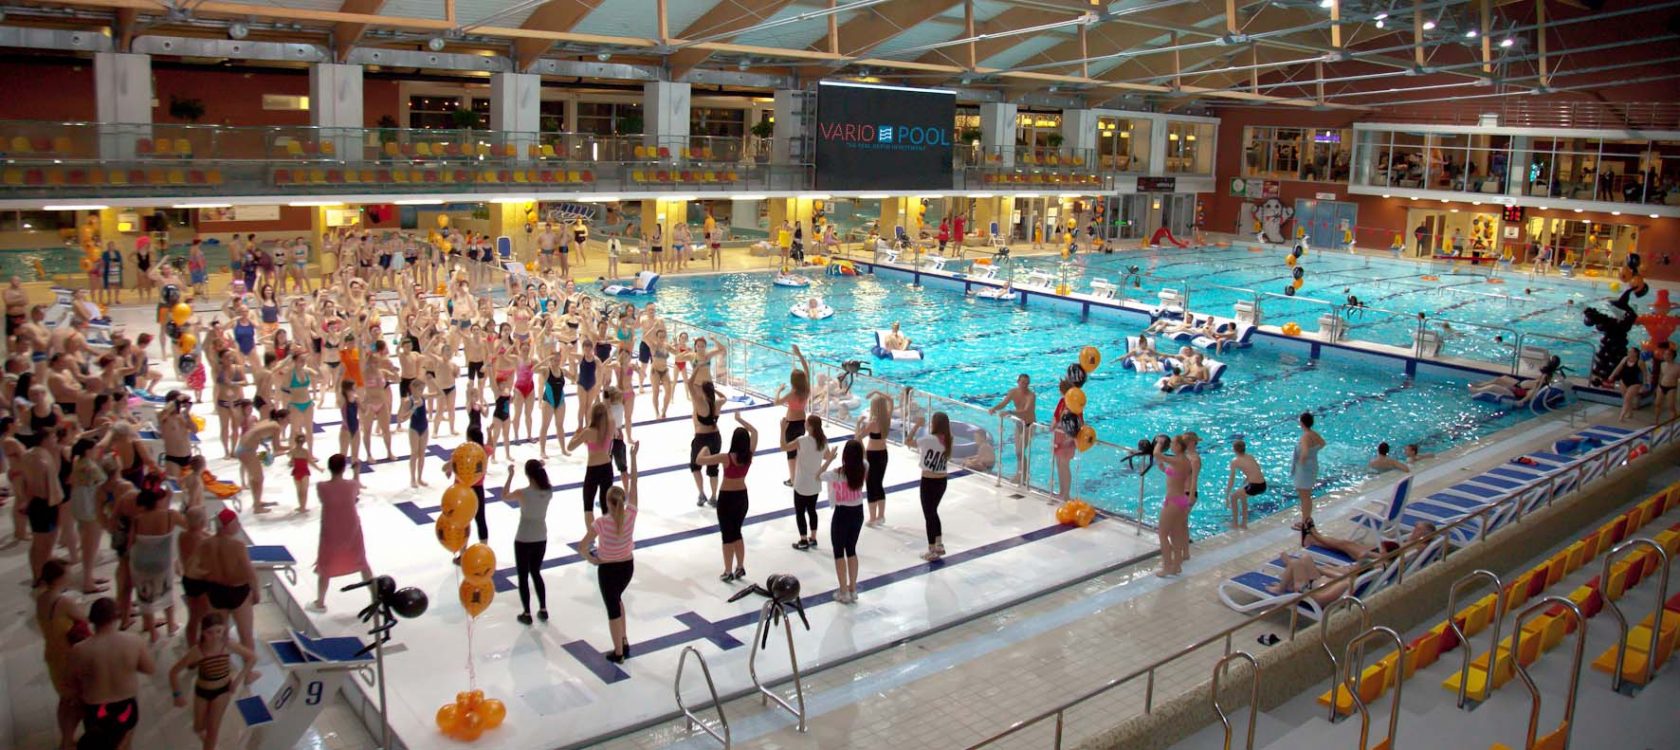 Orléans swimming pool chooses movable floor with valve